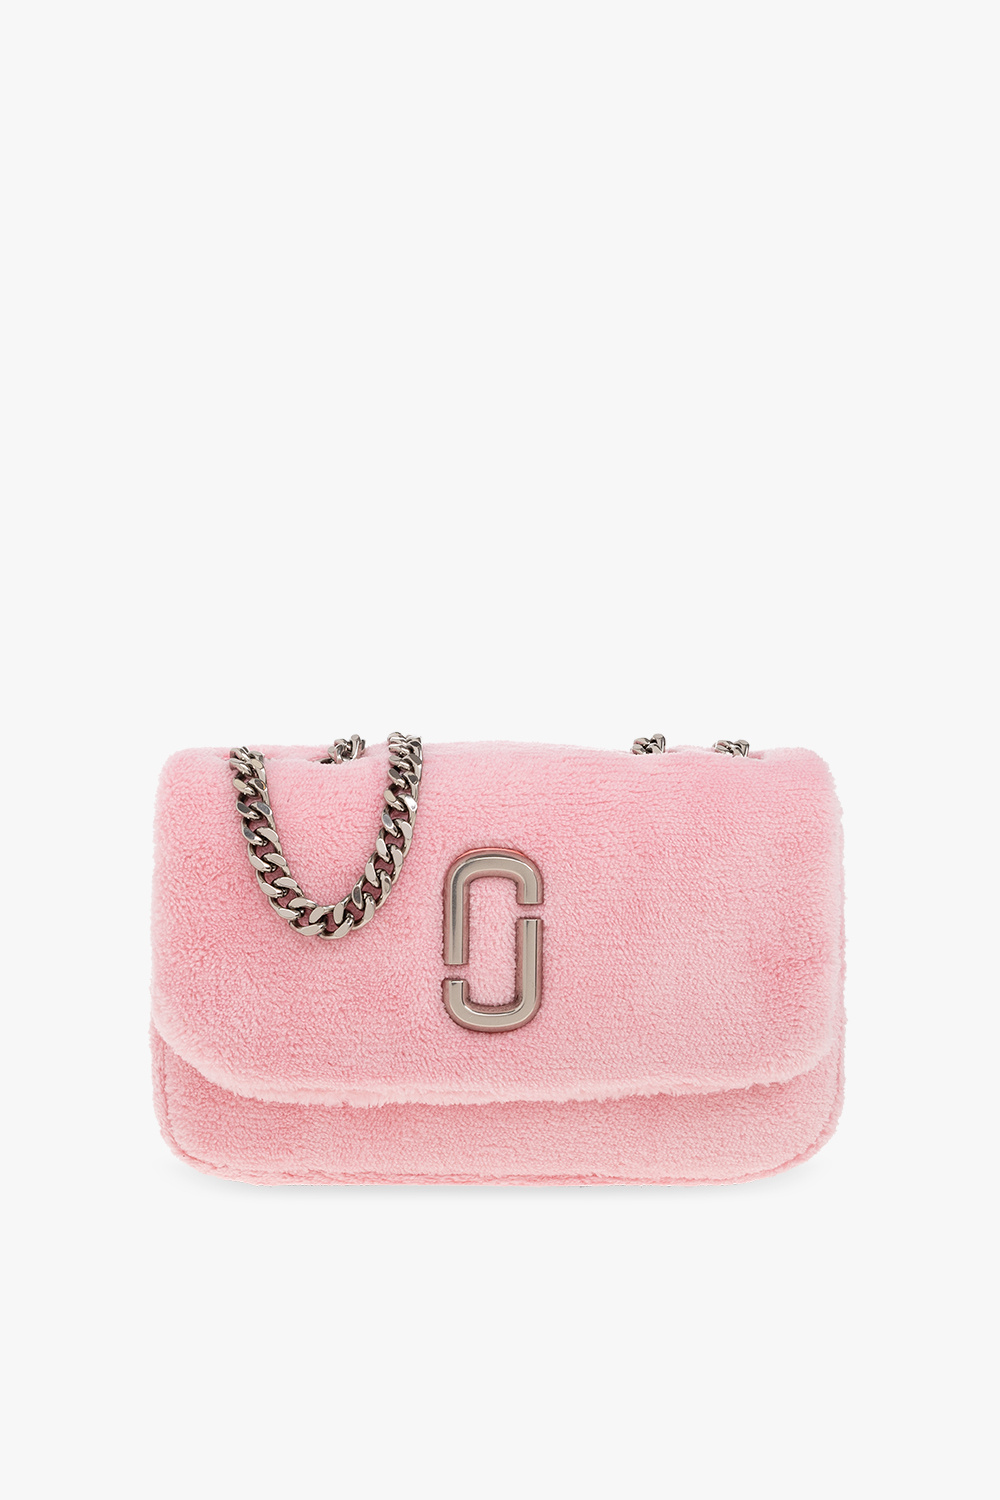 Marc Jacobs Women's Grained Leather Clutch/Wristlet Square Pink 